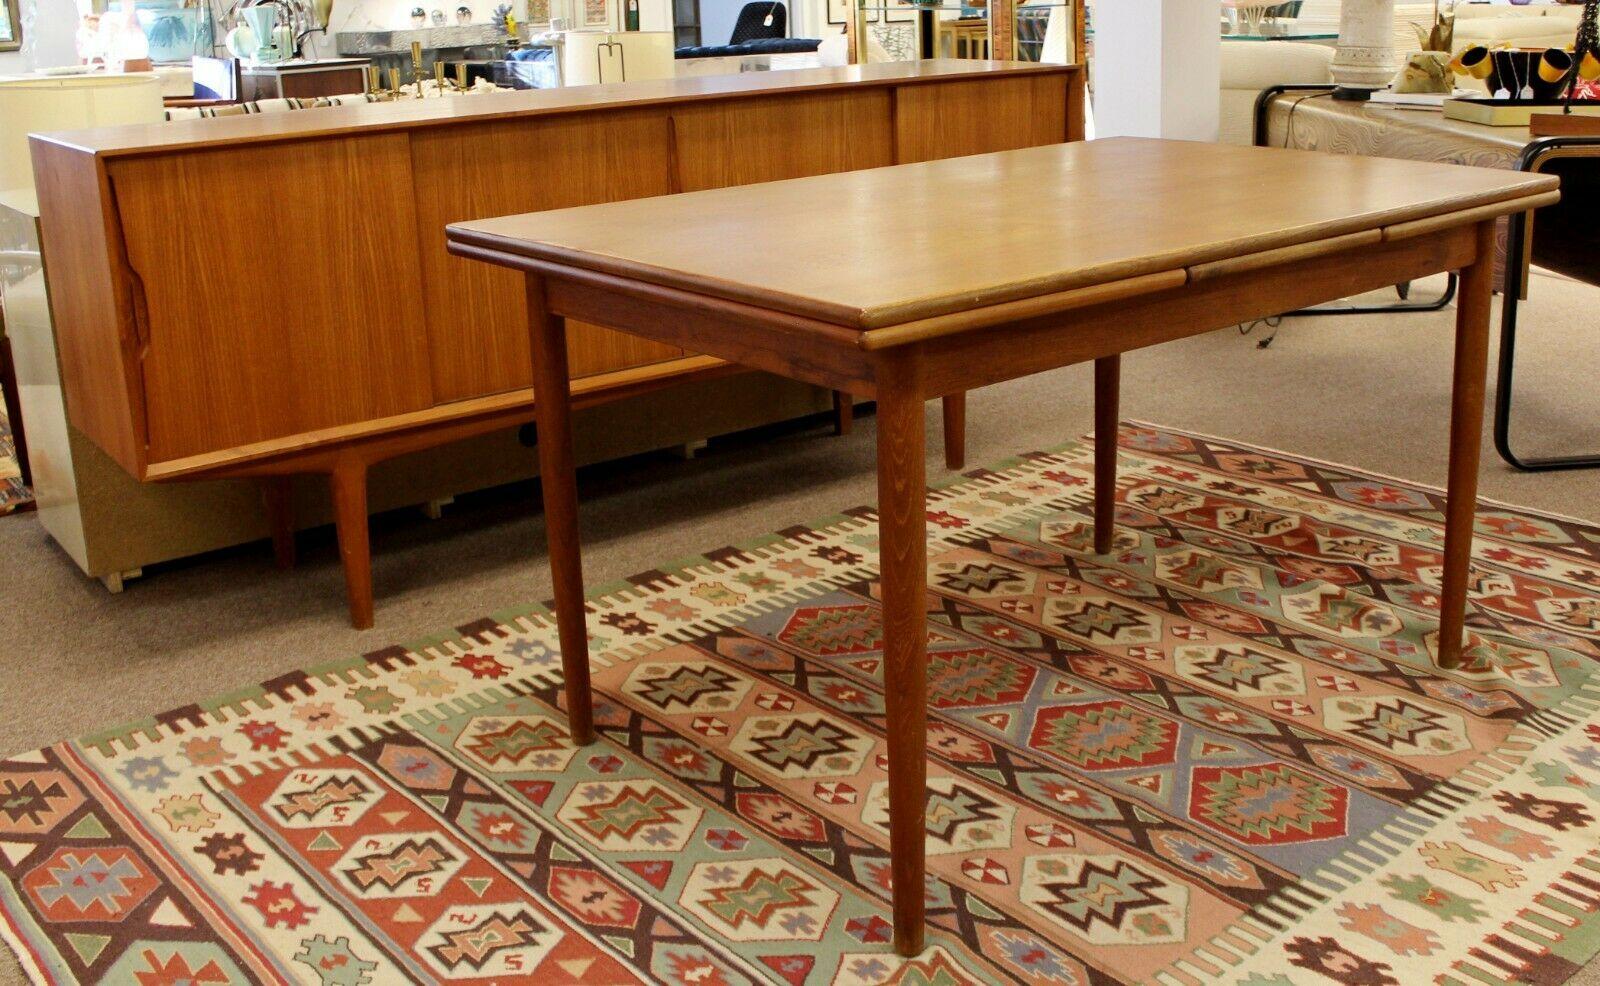 For your consideration is a wonderful, rectangular dining table, with two self containing leaves, designed by Bernhard Pedersen for Vejen Bordfabrik, circa 1950s. In excellent vintage condition. The dimensions are 51